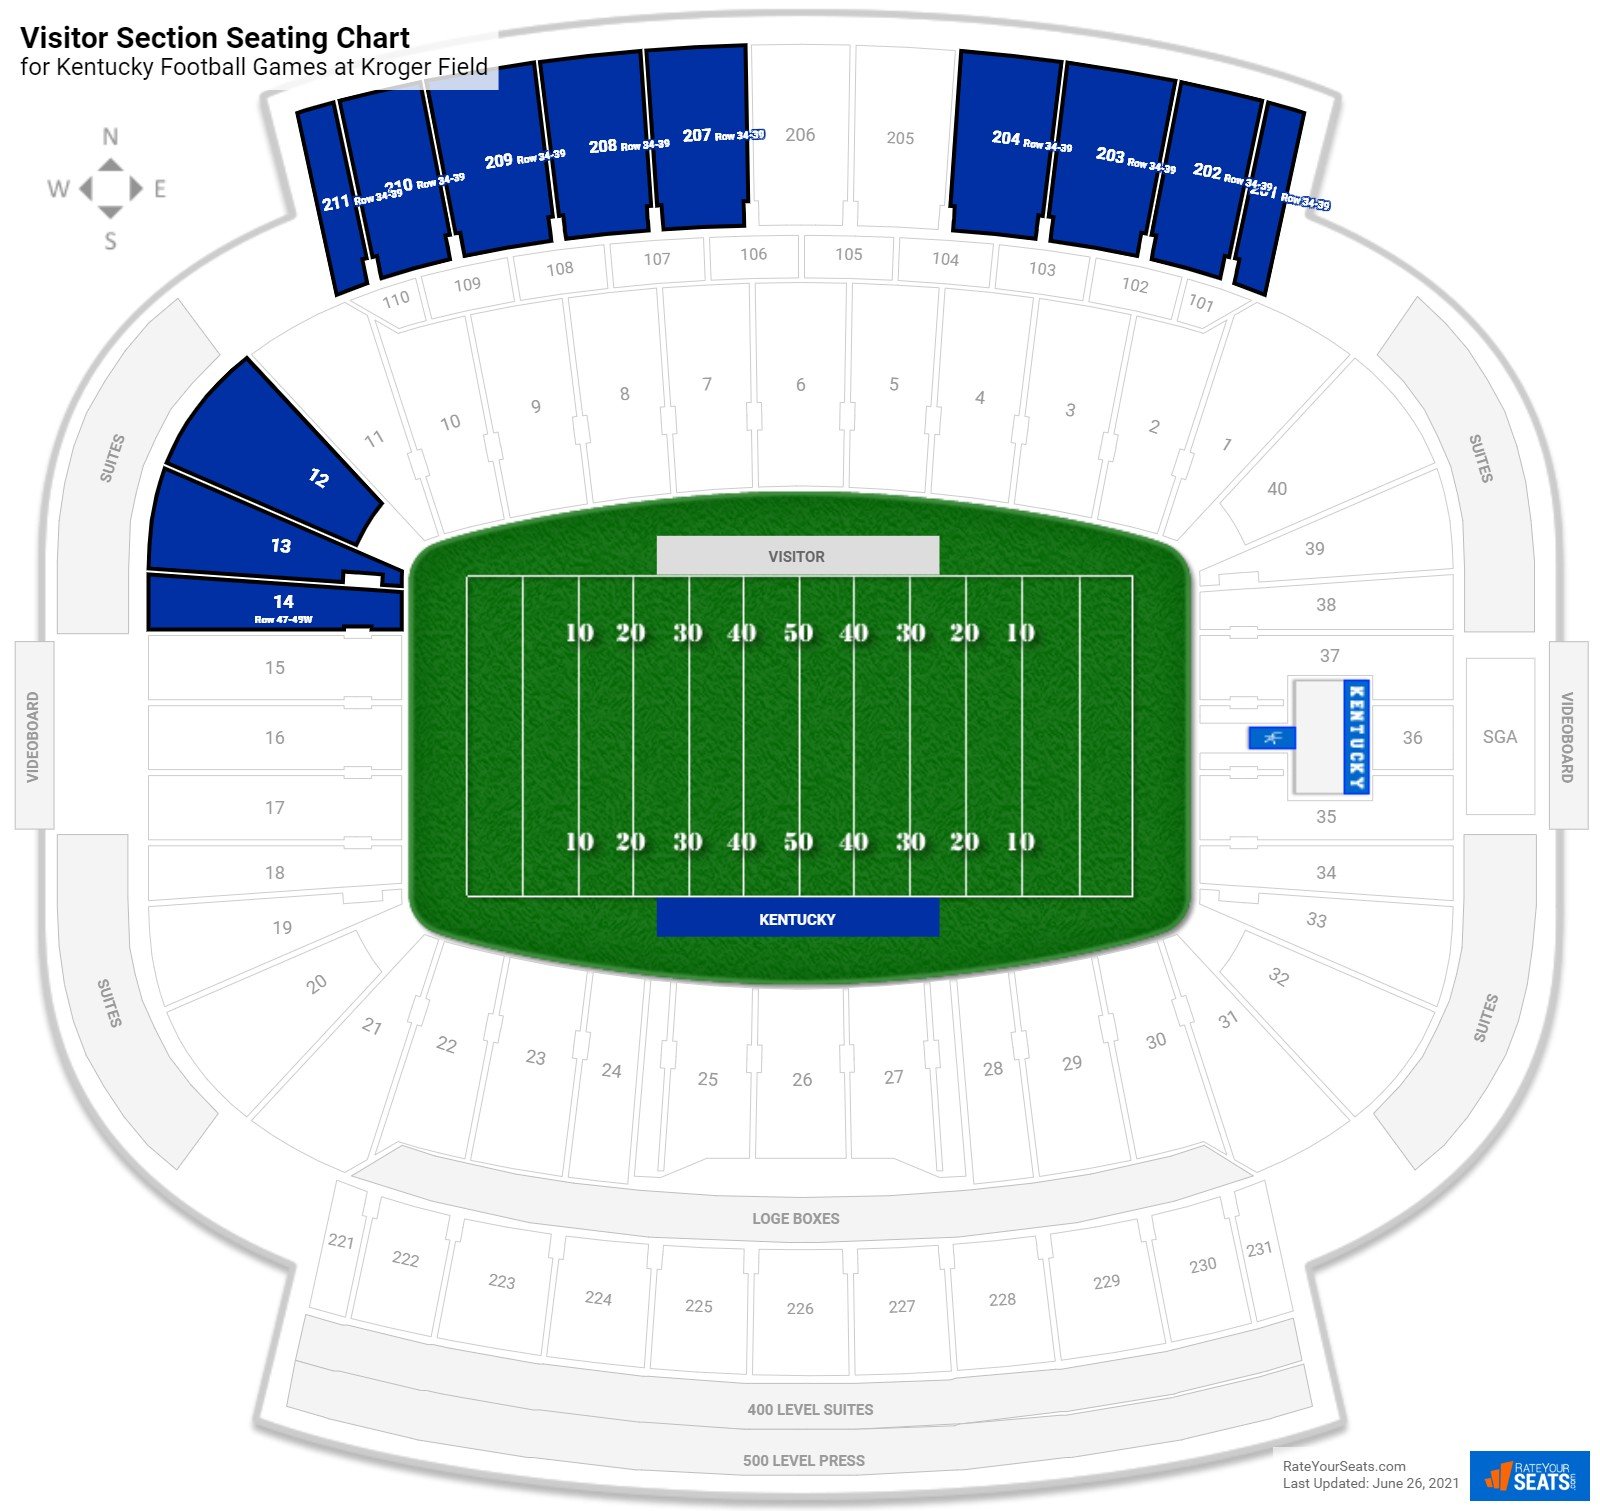 Kentucky Visitor Section Seating Chart at Kroger Field